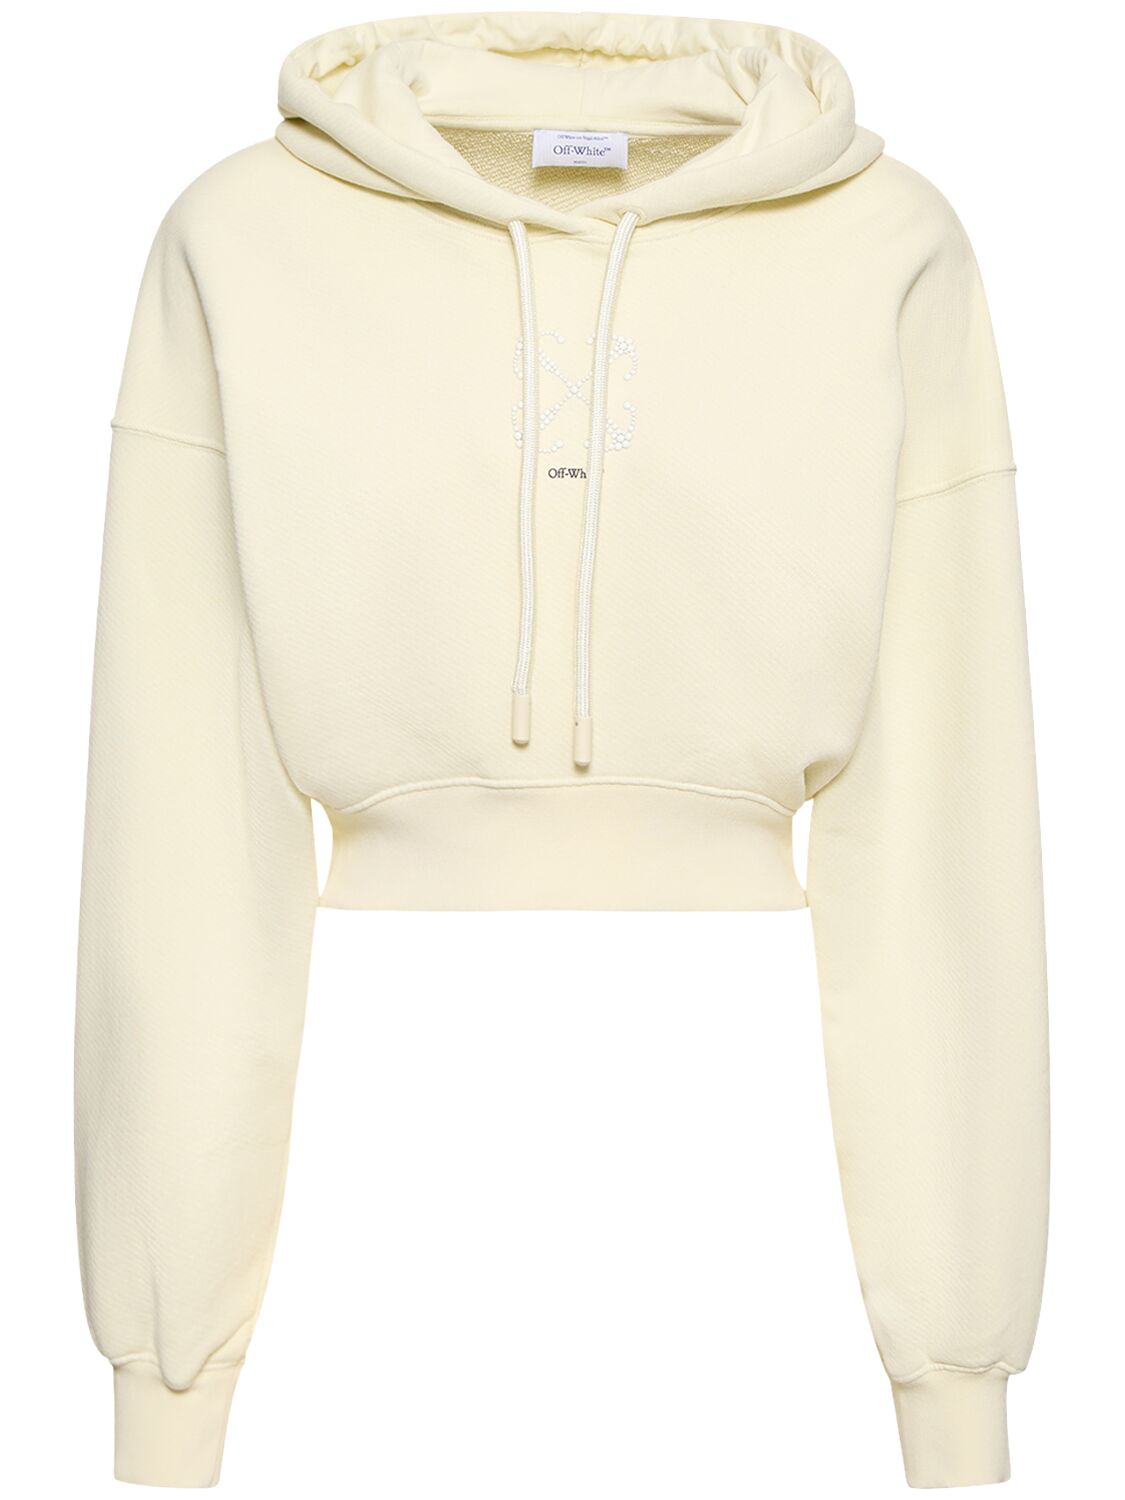 OFF-WHITE EMBELLISHED COTTON CROPPED HOODIE